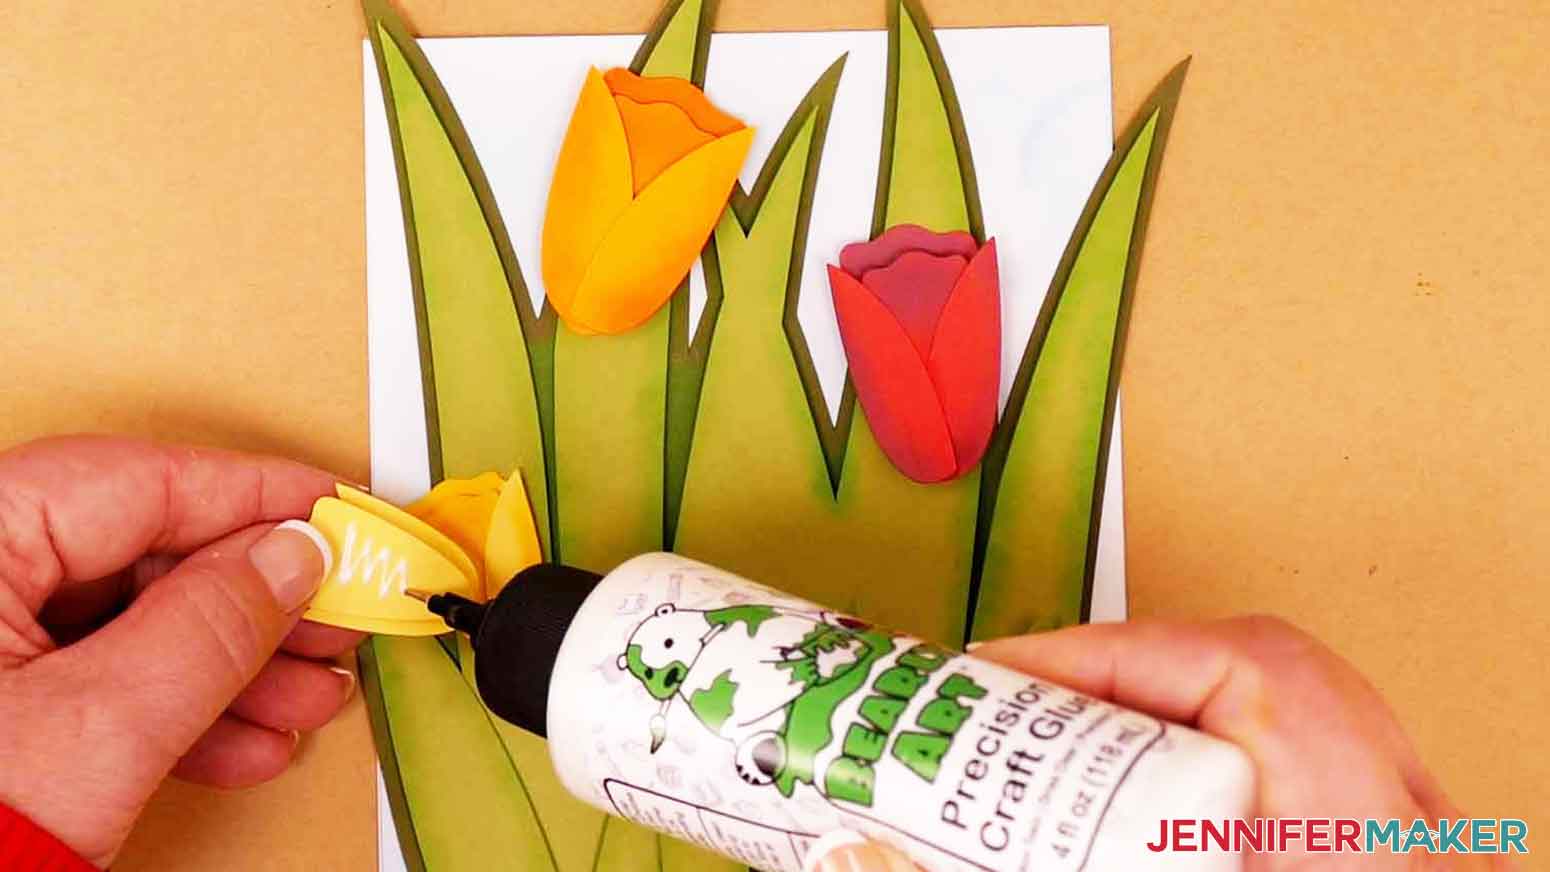 Apply craft glue to the back of each tulip flower and attach to the leaves on the card.